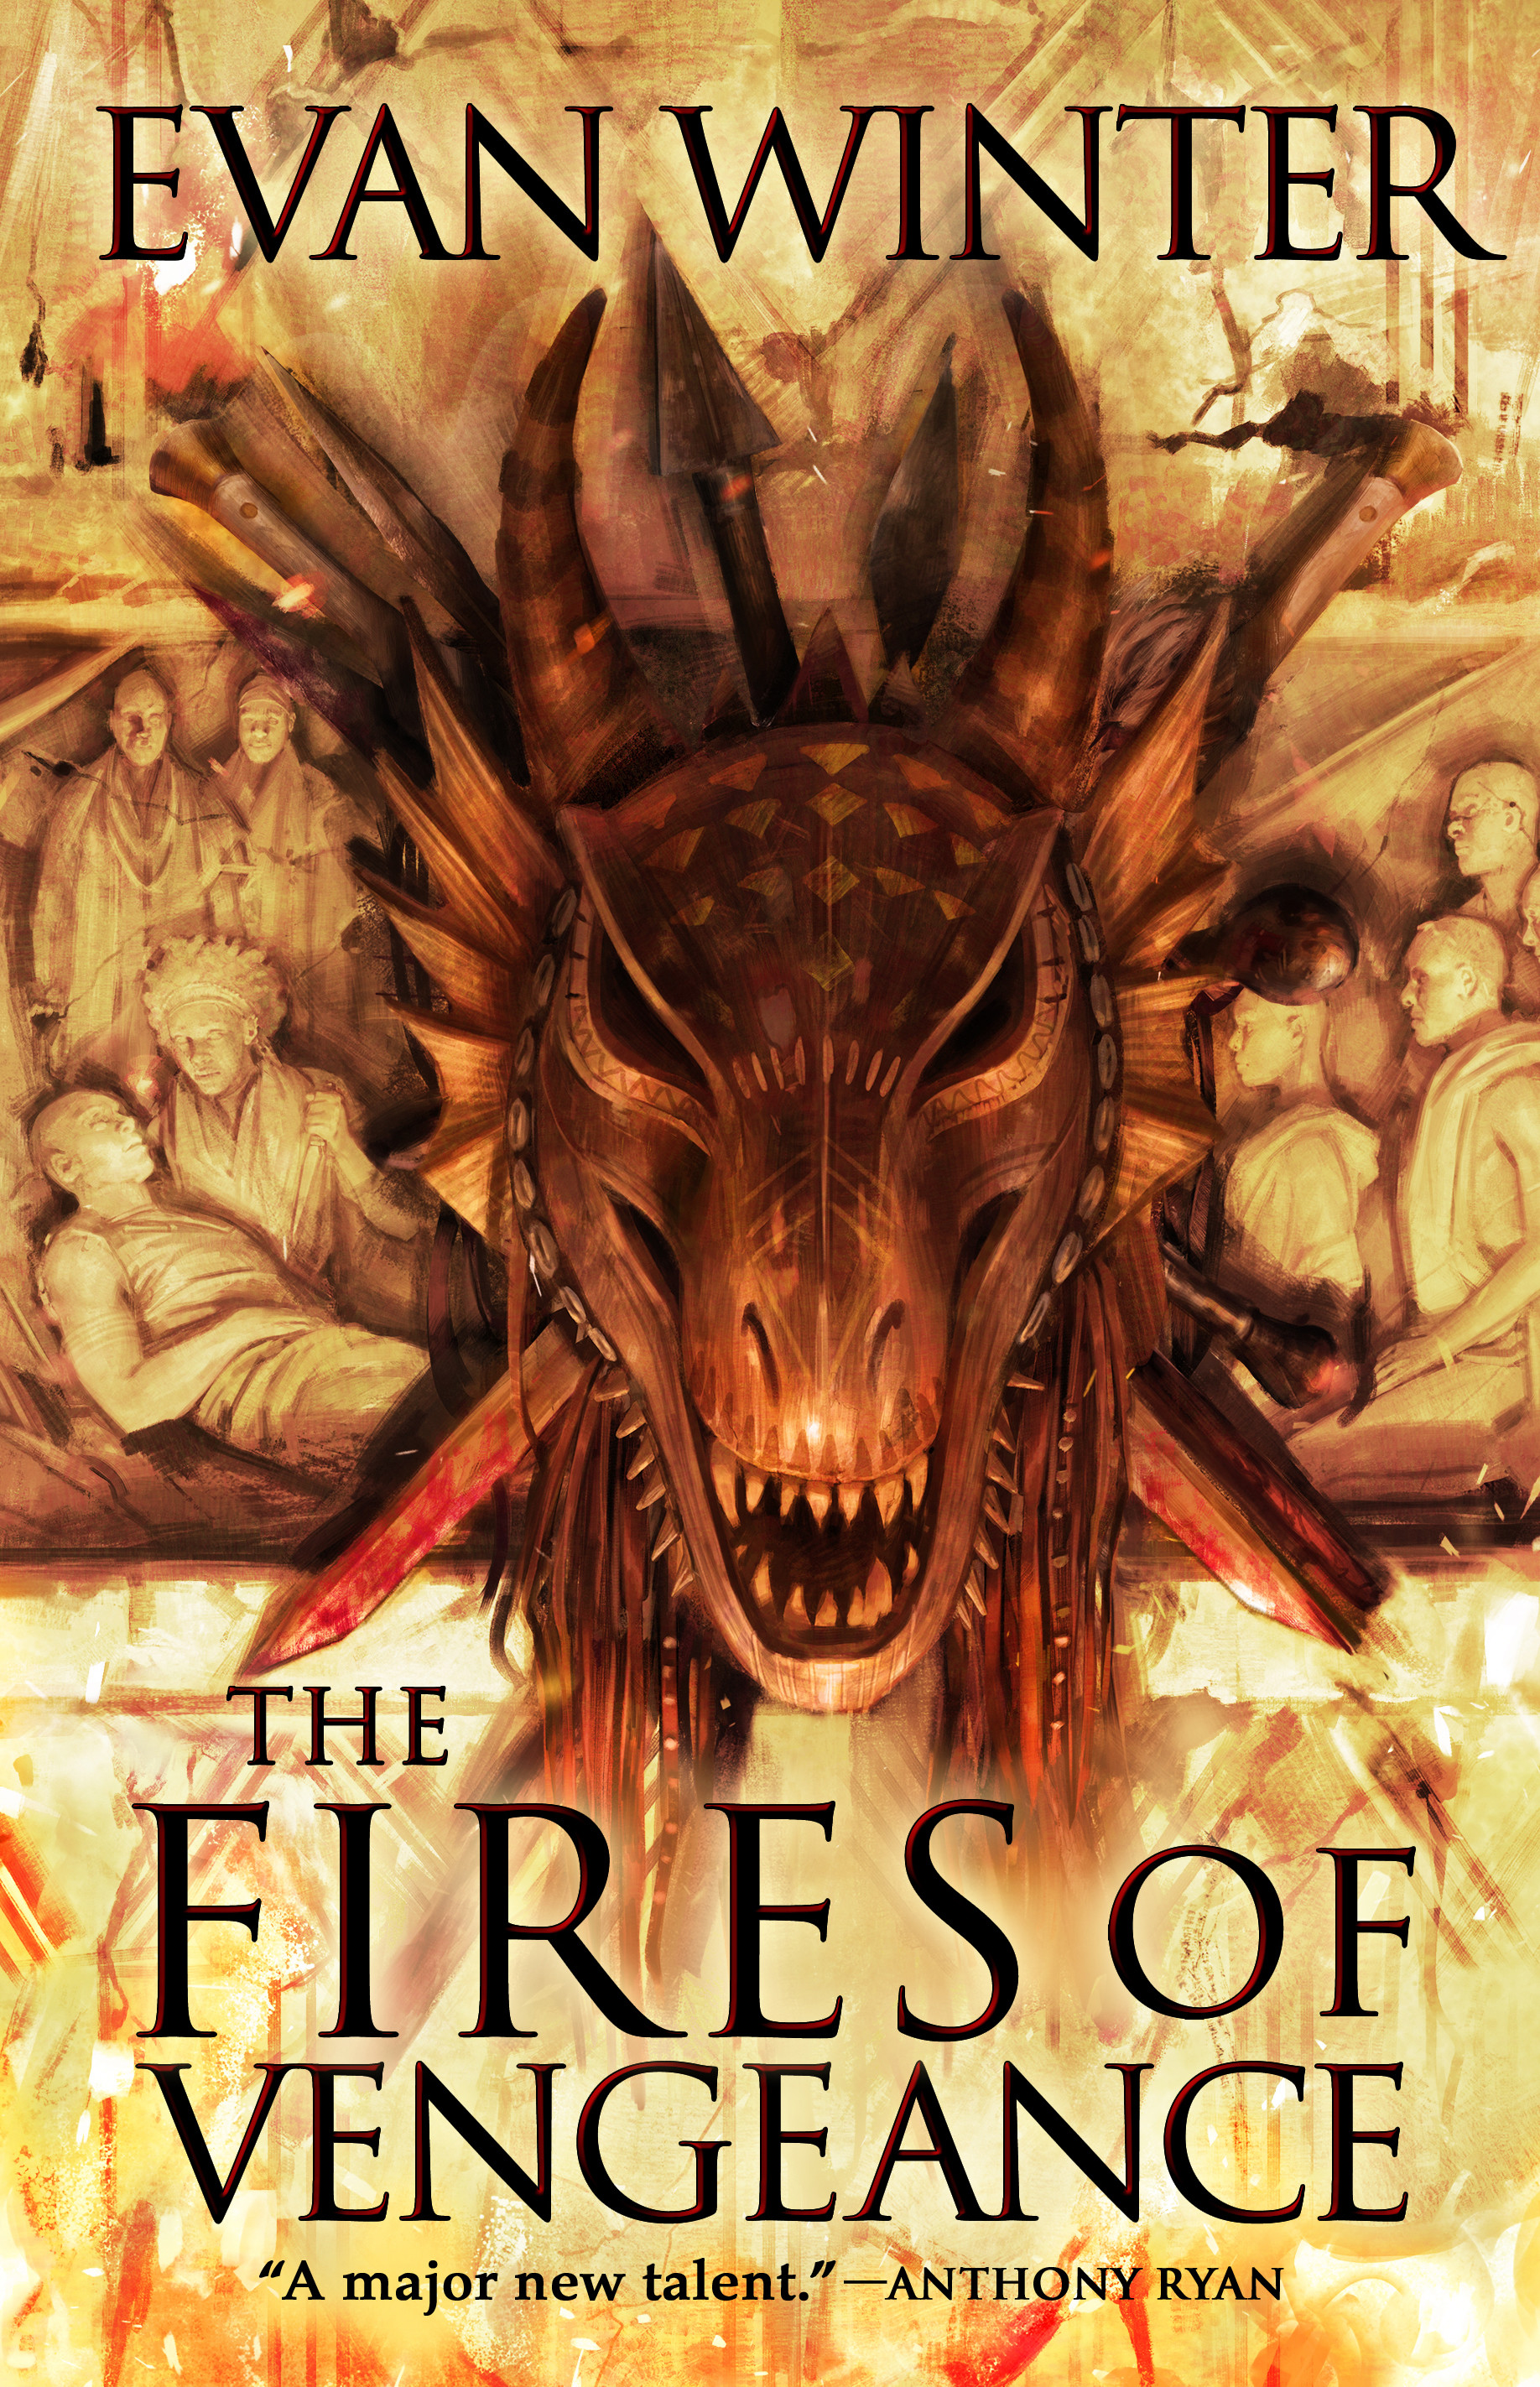 Winter, Evan - The Fires of Vengeance - BookCover